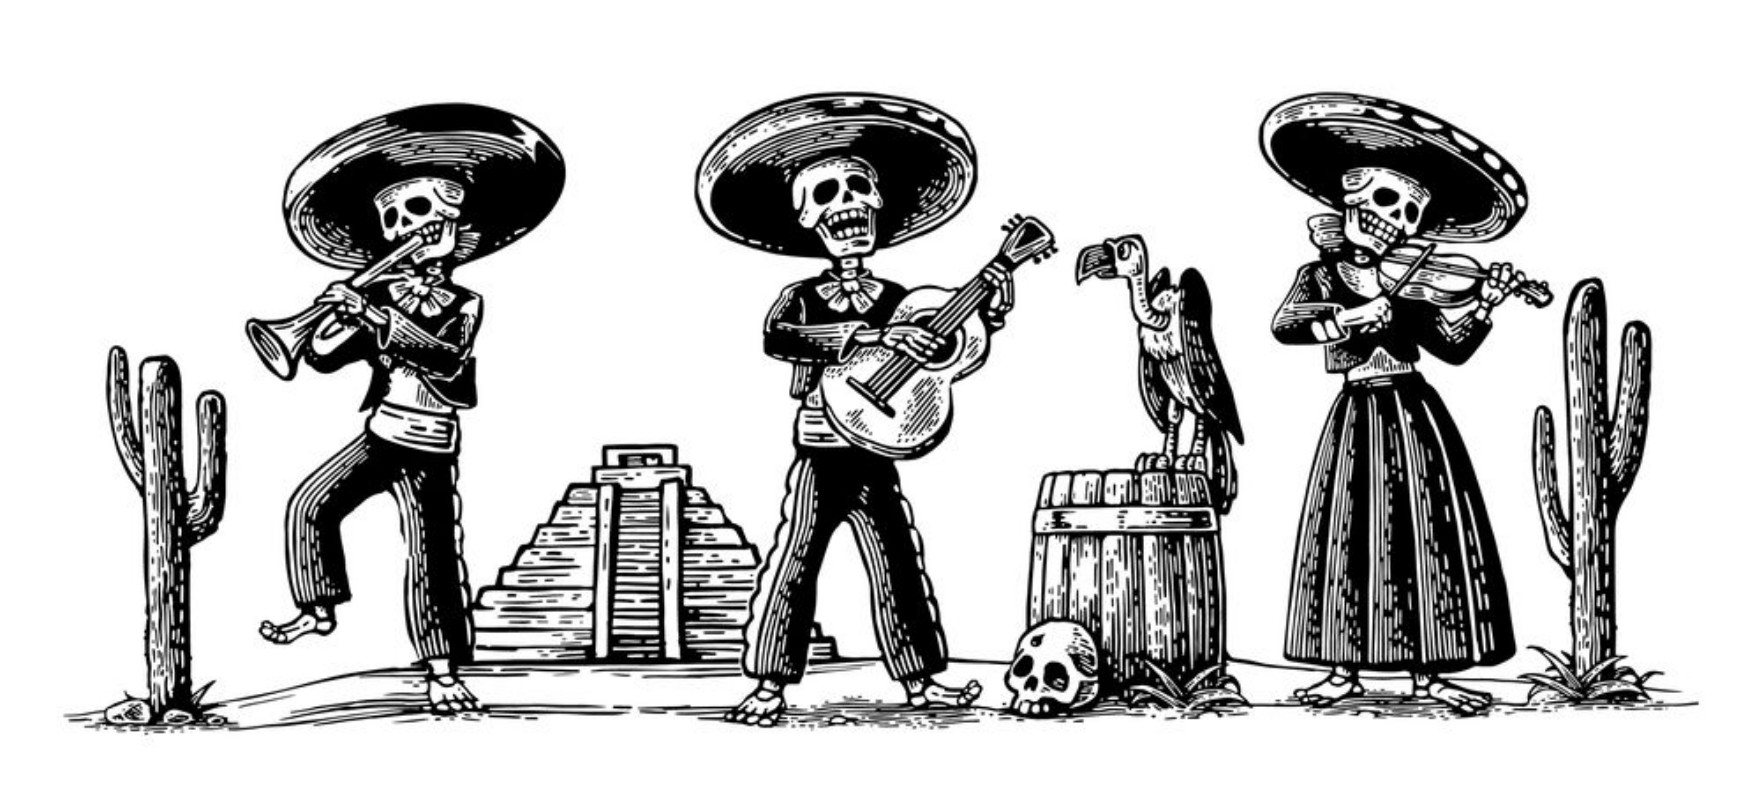 Image de Day of the Dead Dia de los Muertos The skeleton in the Mexican national costumes dance sing and play the guitar